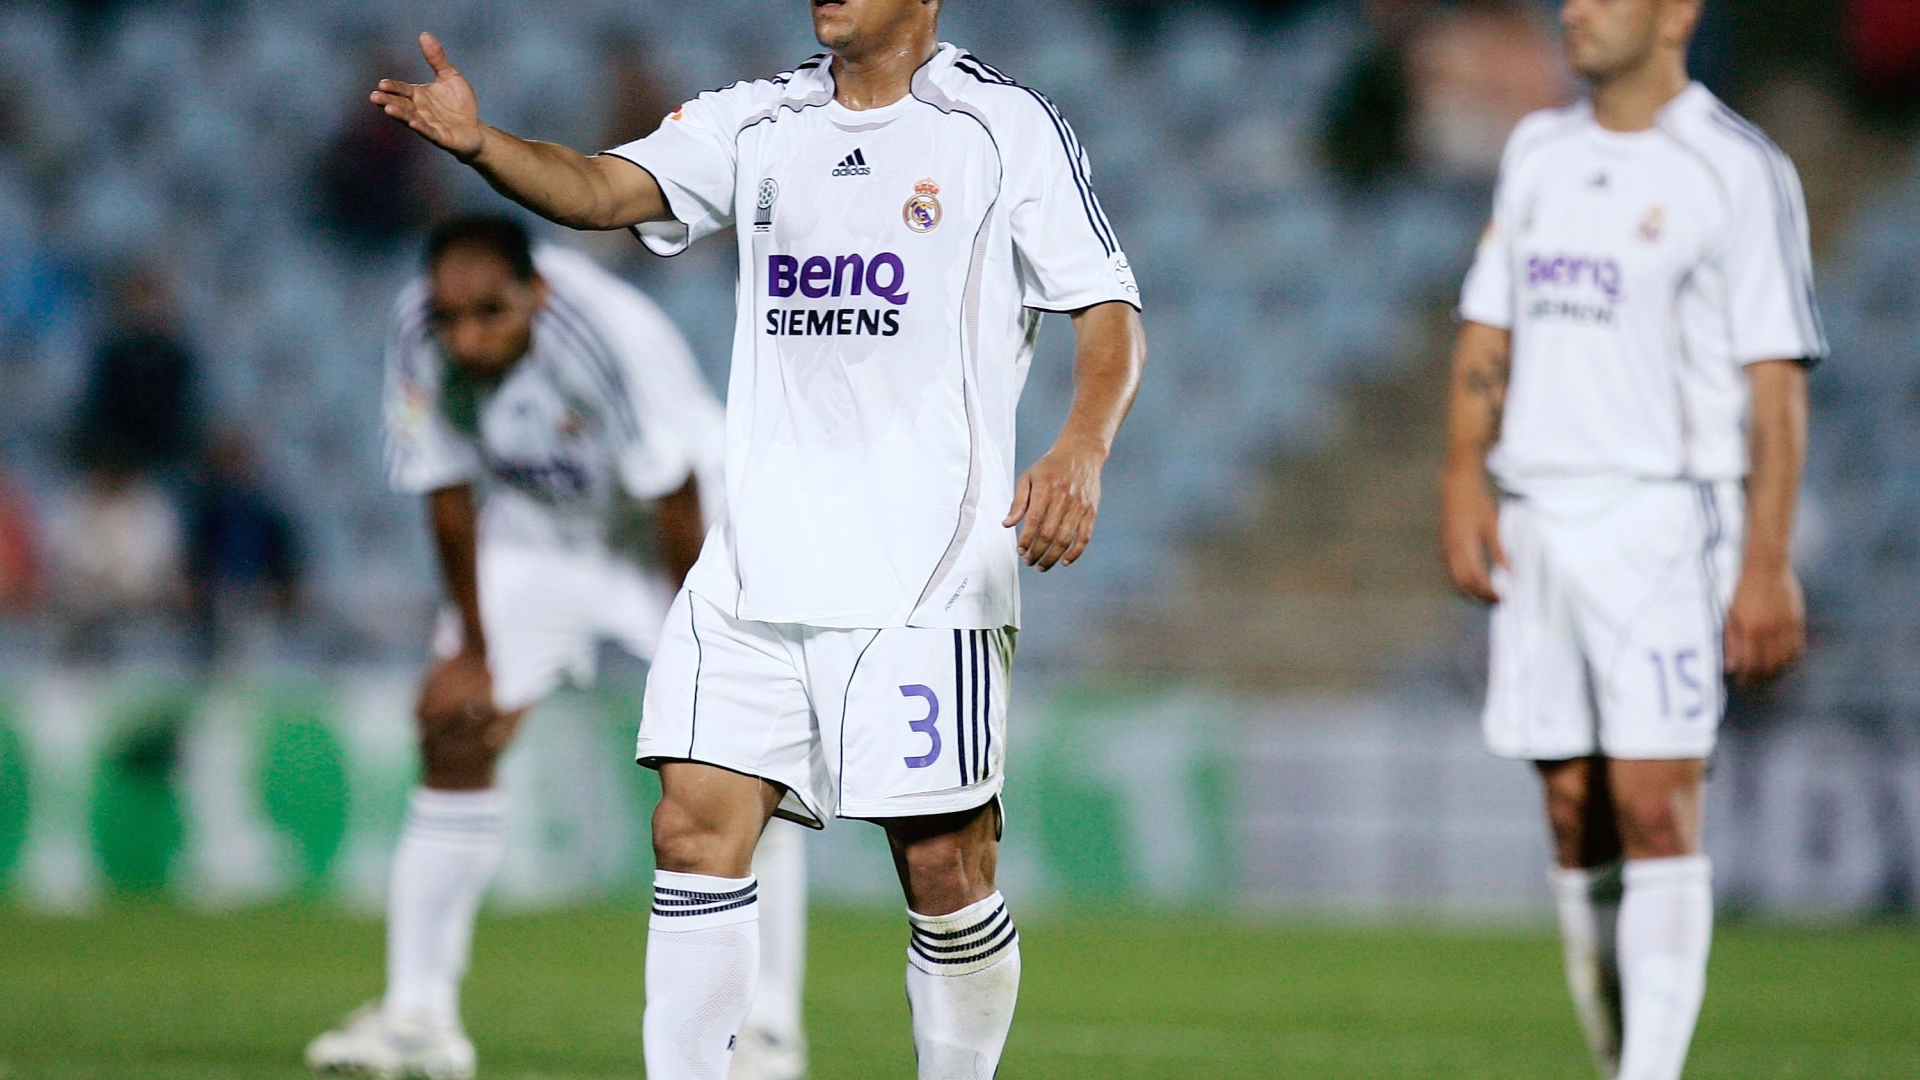 Football legend Roberto Carlos on the field in a middle of the game